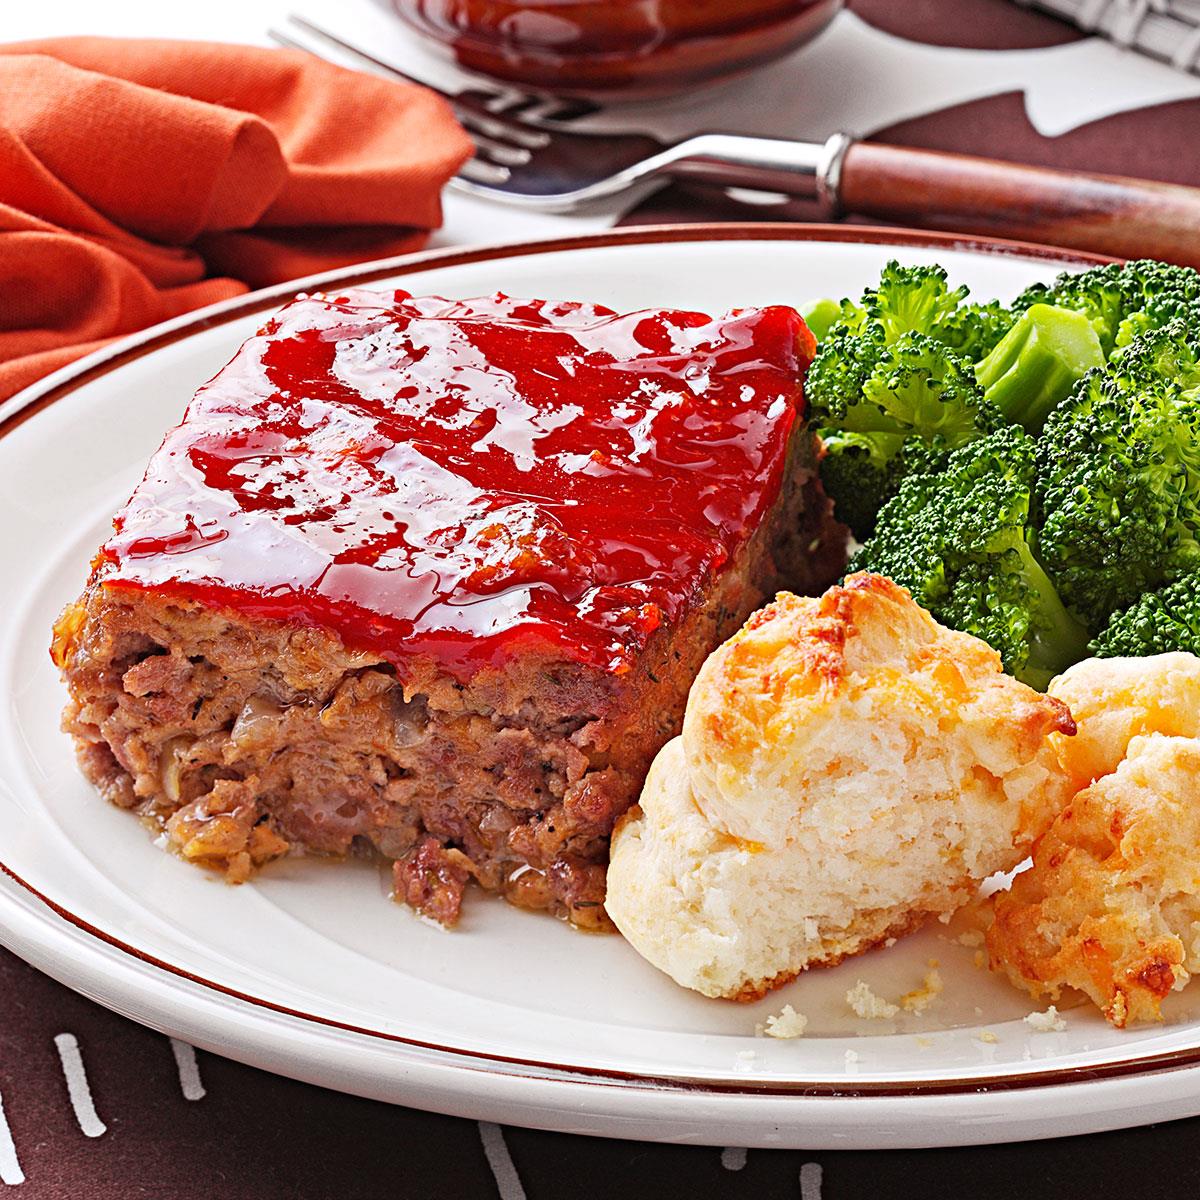 Moist Savory Meat Loaf Recipe Taste Of Home,How Long Are Car Seats Good For Baby Trend